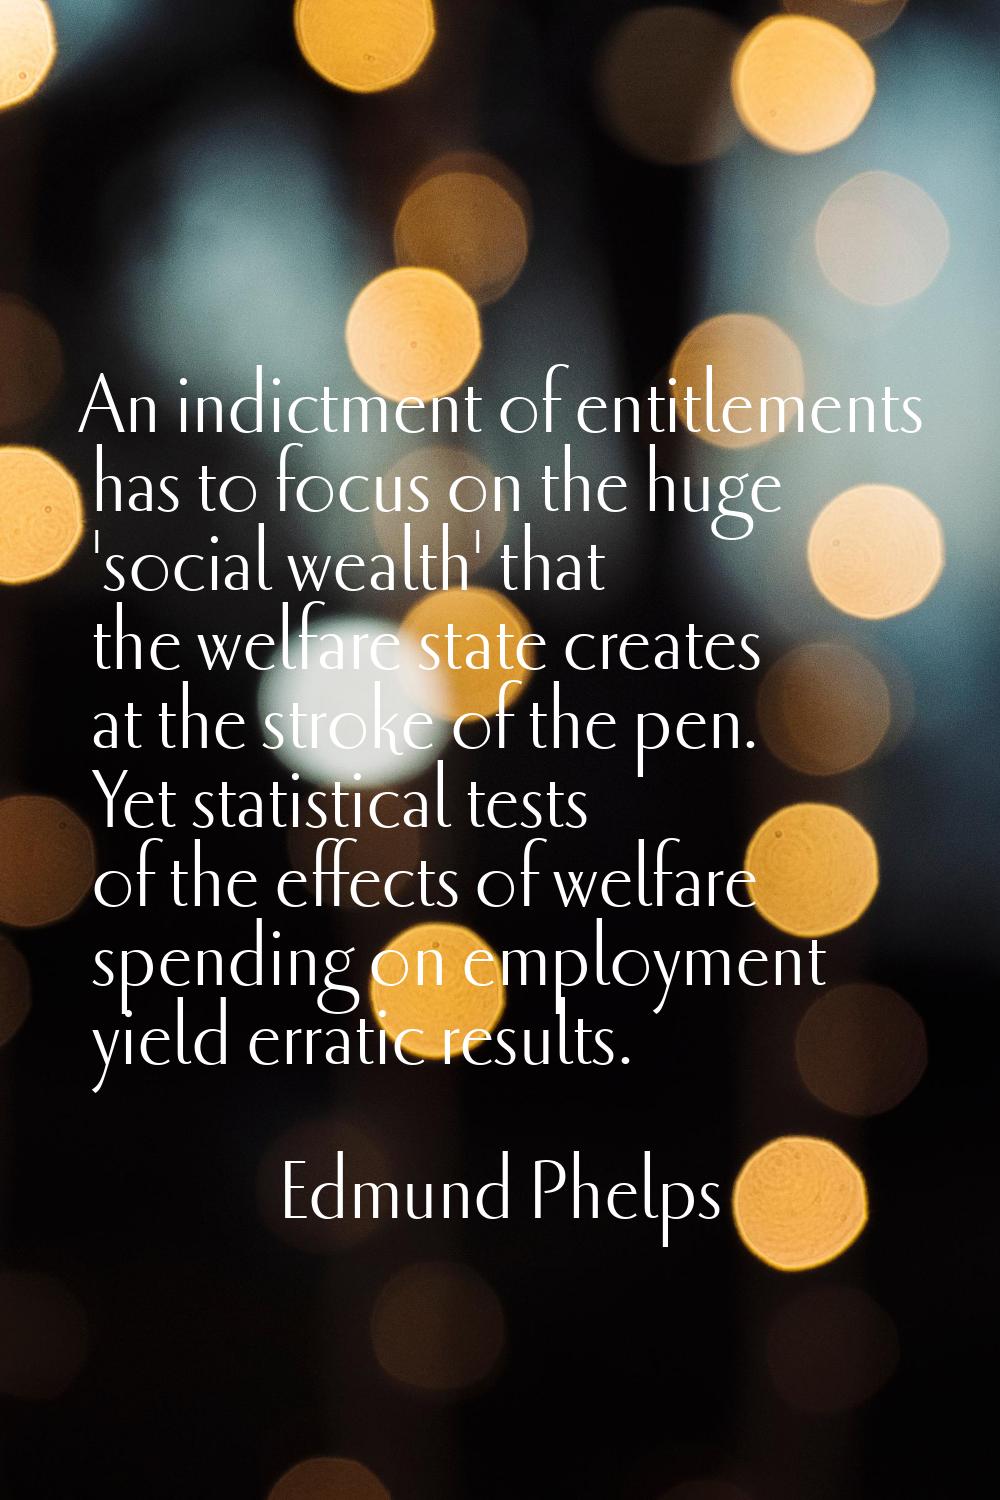 An indictment of entitlements has to focus on the huge 'social wealth' that the welfare state creat